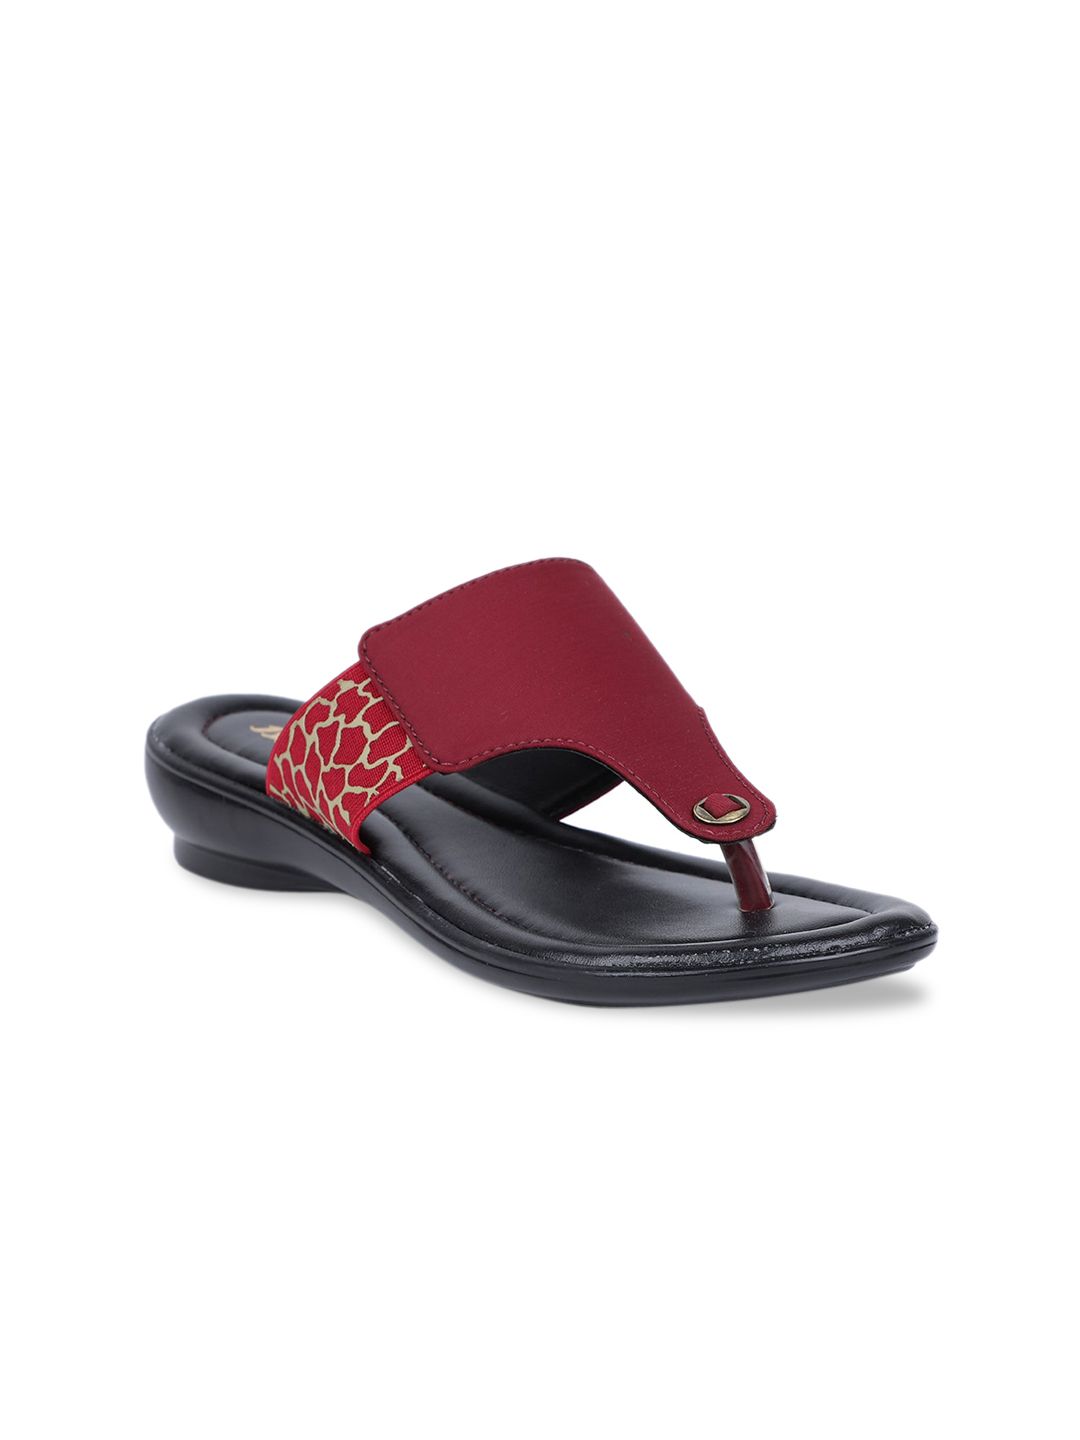 Bata Women Red Open Toe Flats Price in India